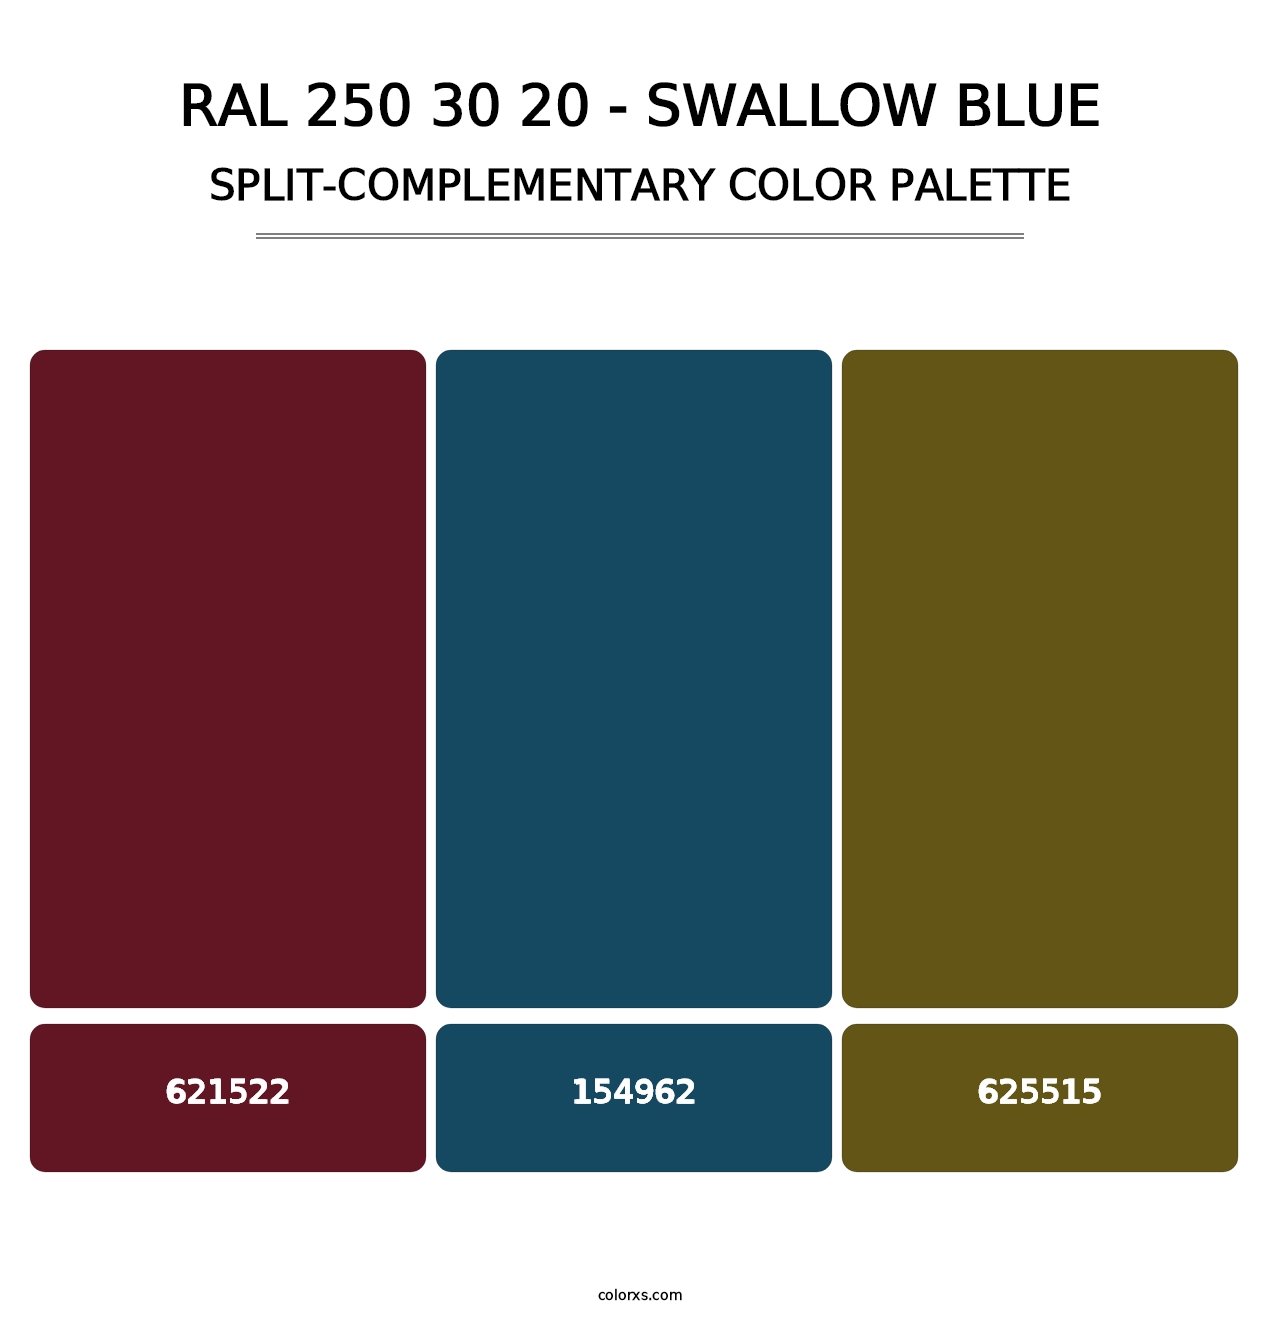 RAL 250 30 20 - Swallow Blue - Split-Complementary Color Palette